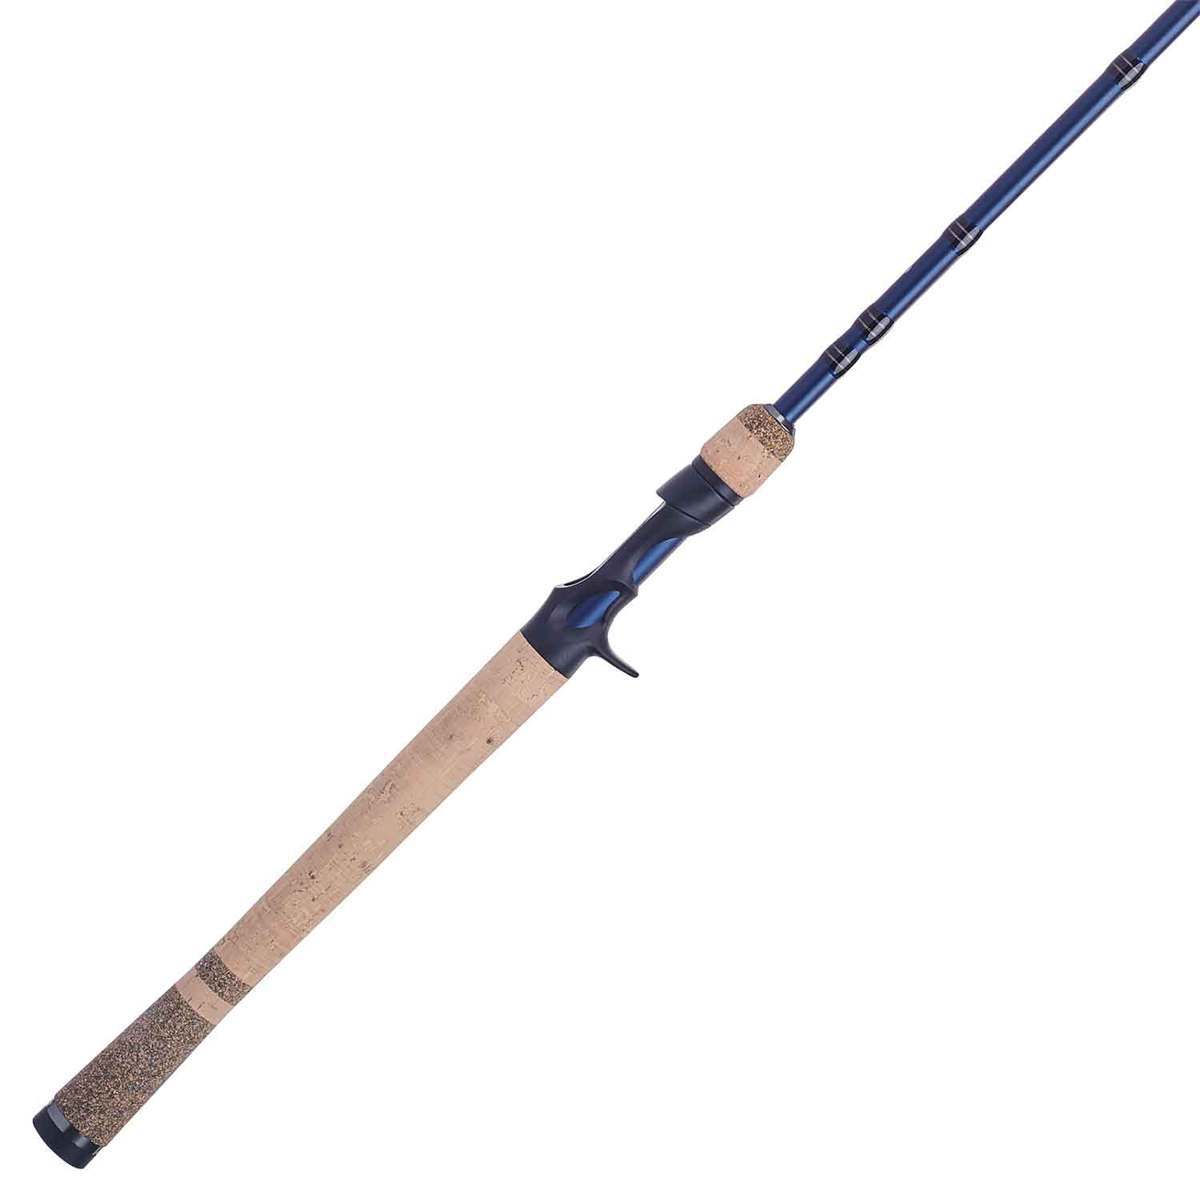 Fenwick Eagle Casting Rod - 9ft 6in, Medium Power, Moderate Fast